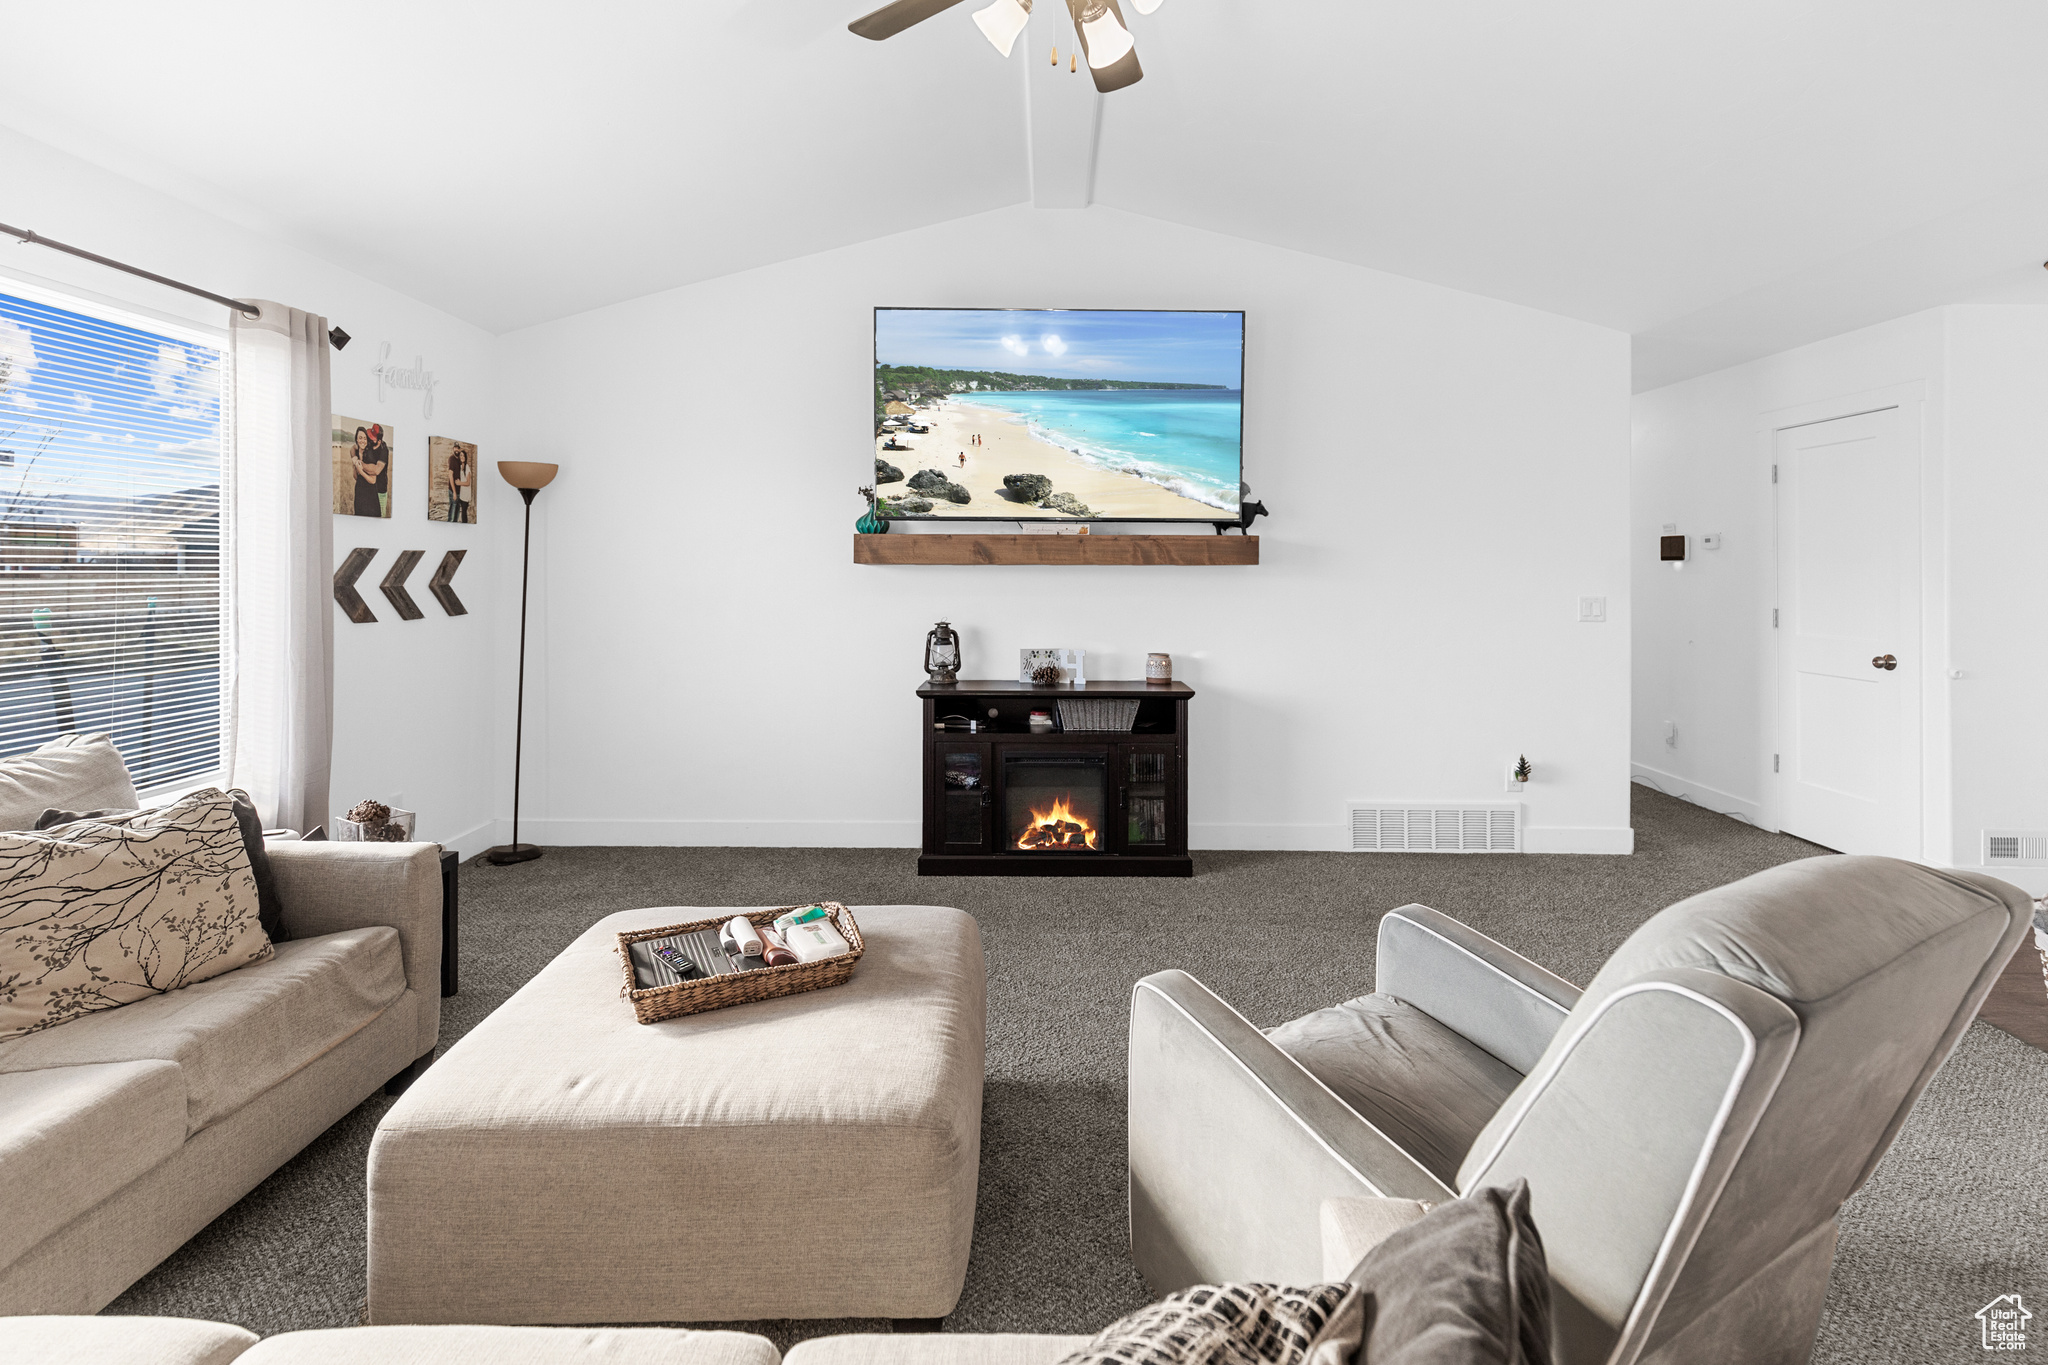 Living room featuring vaulted ceiling, dark carpet, and ceiling fan